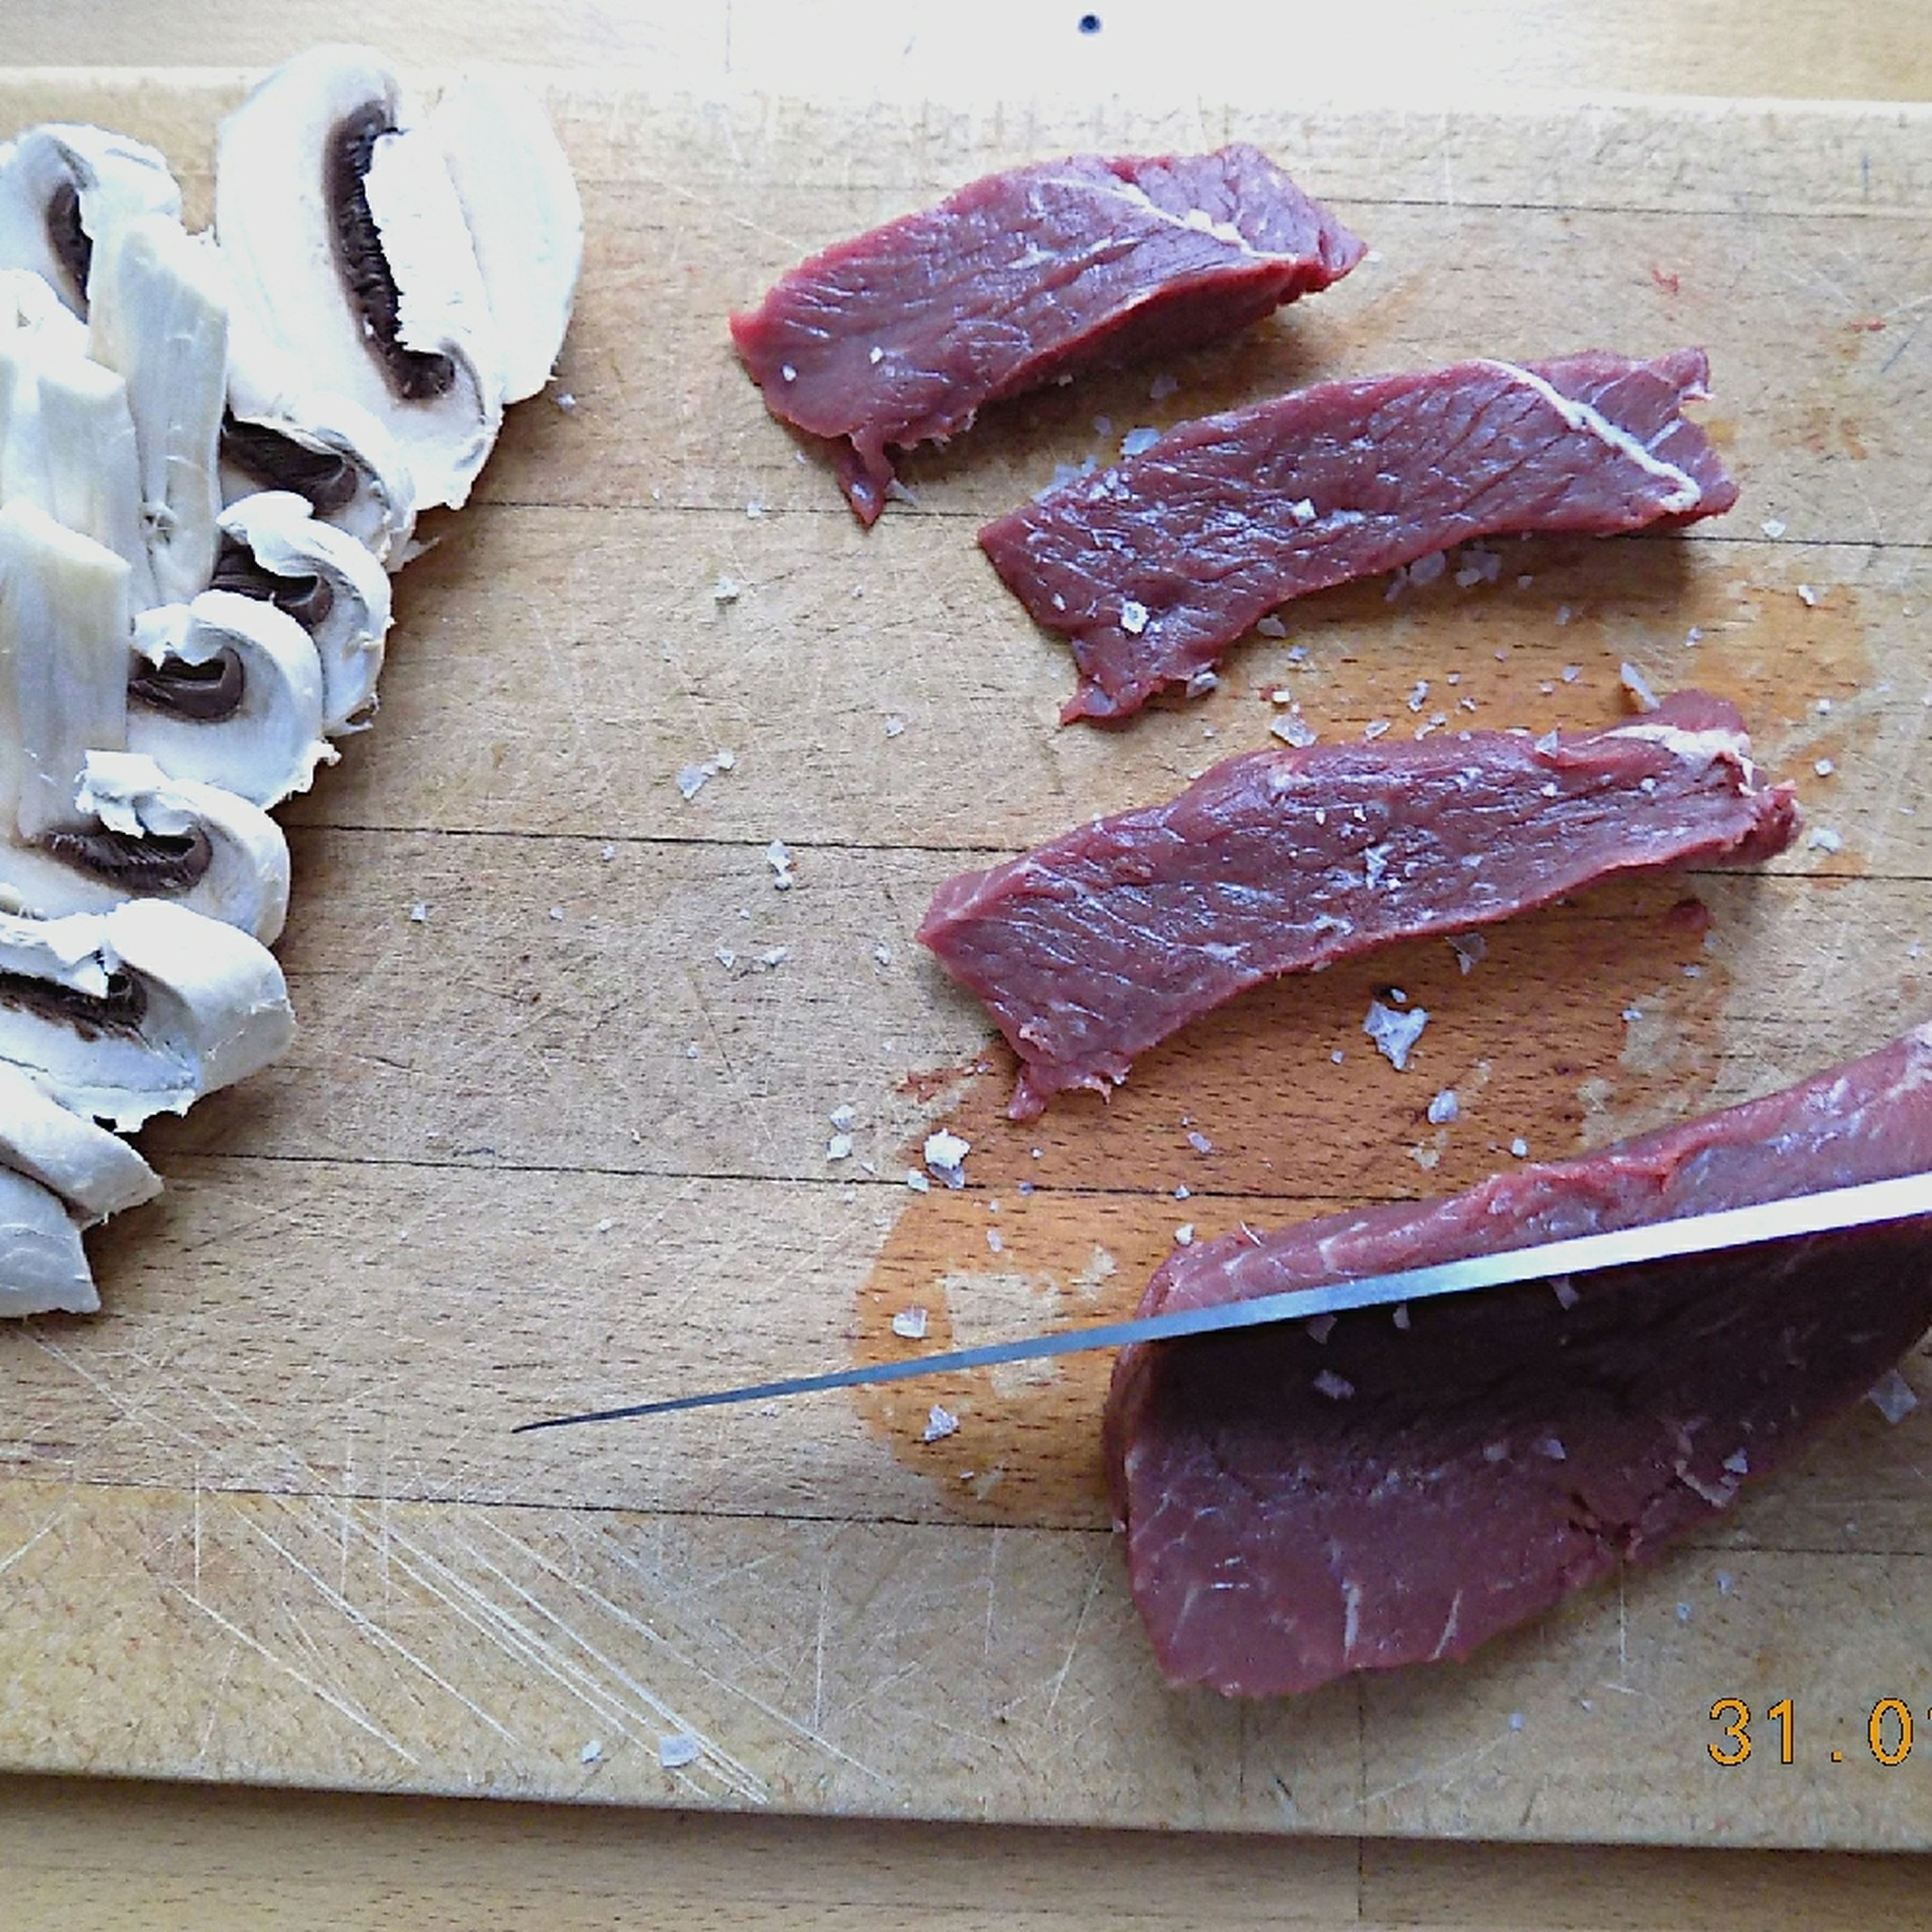 Slice the beef filet into strips and season with salt and pepper. Slice mushrooms.